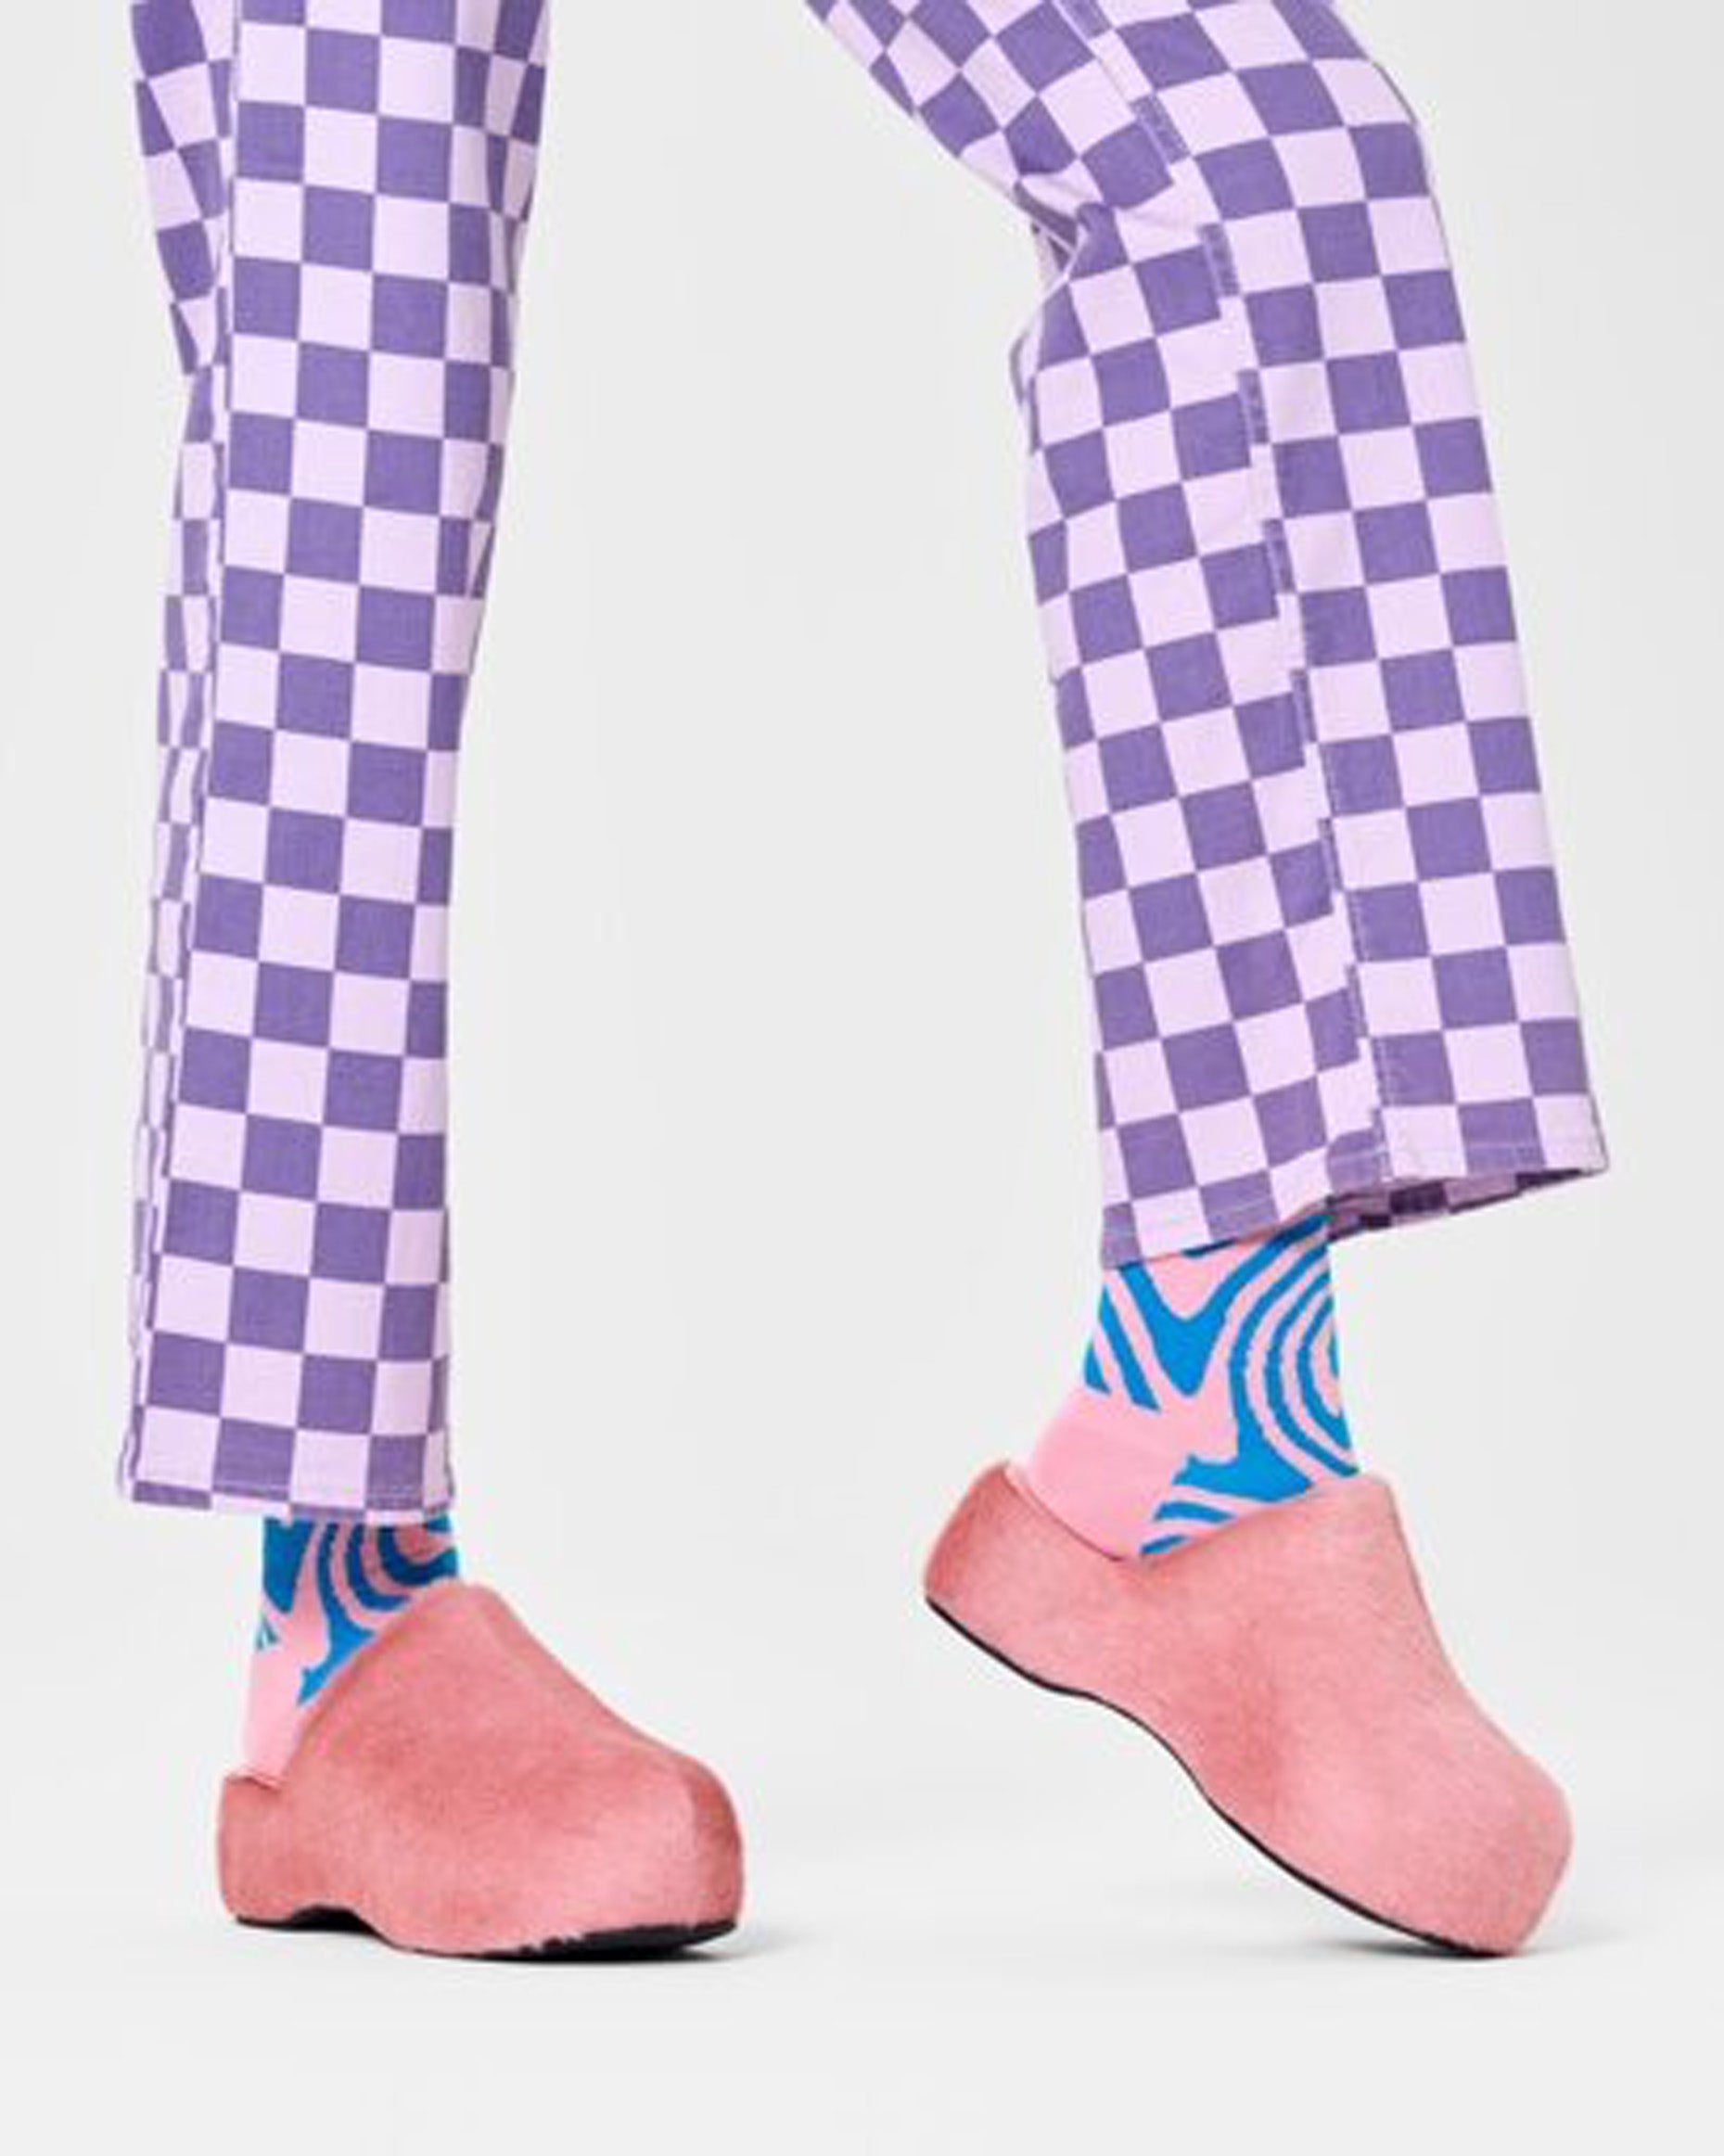 Happy Socks P000736 Dizzy Socks - Light pale pink cotton crew length ankle socks with a swirling psychedelic style linear pattern in blue.